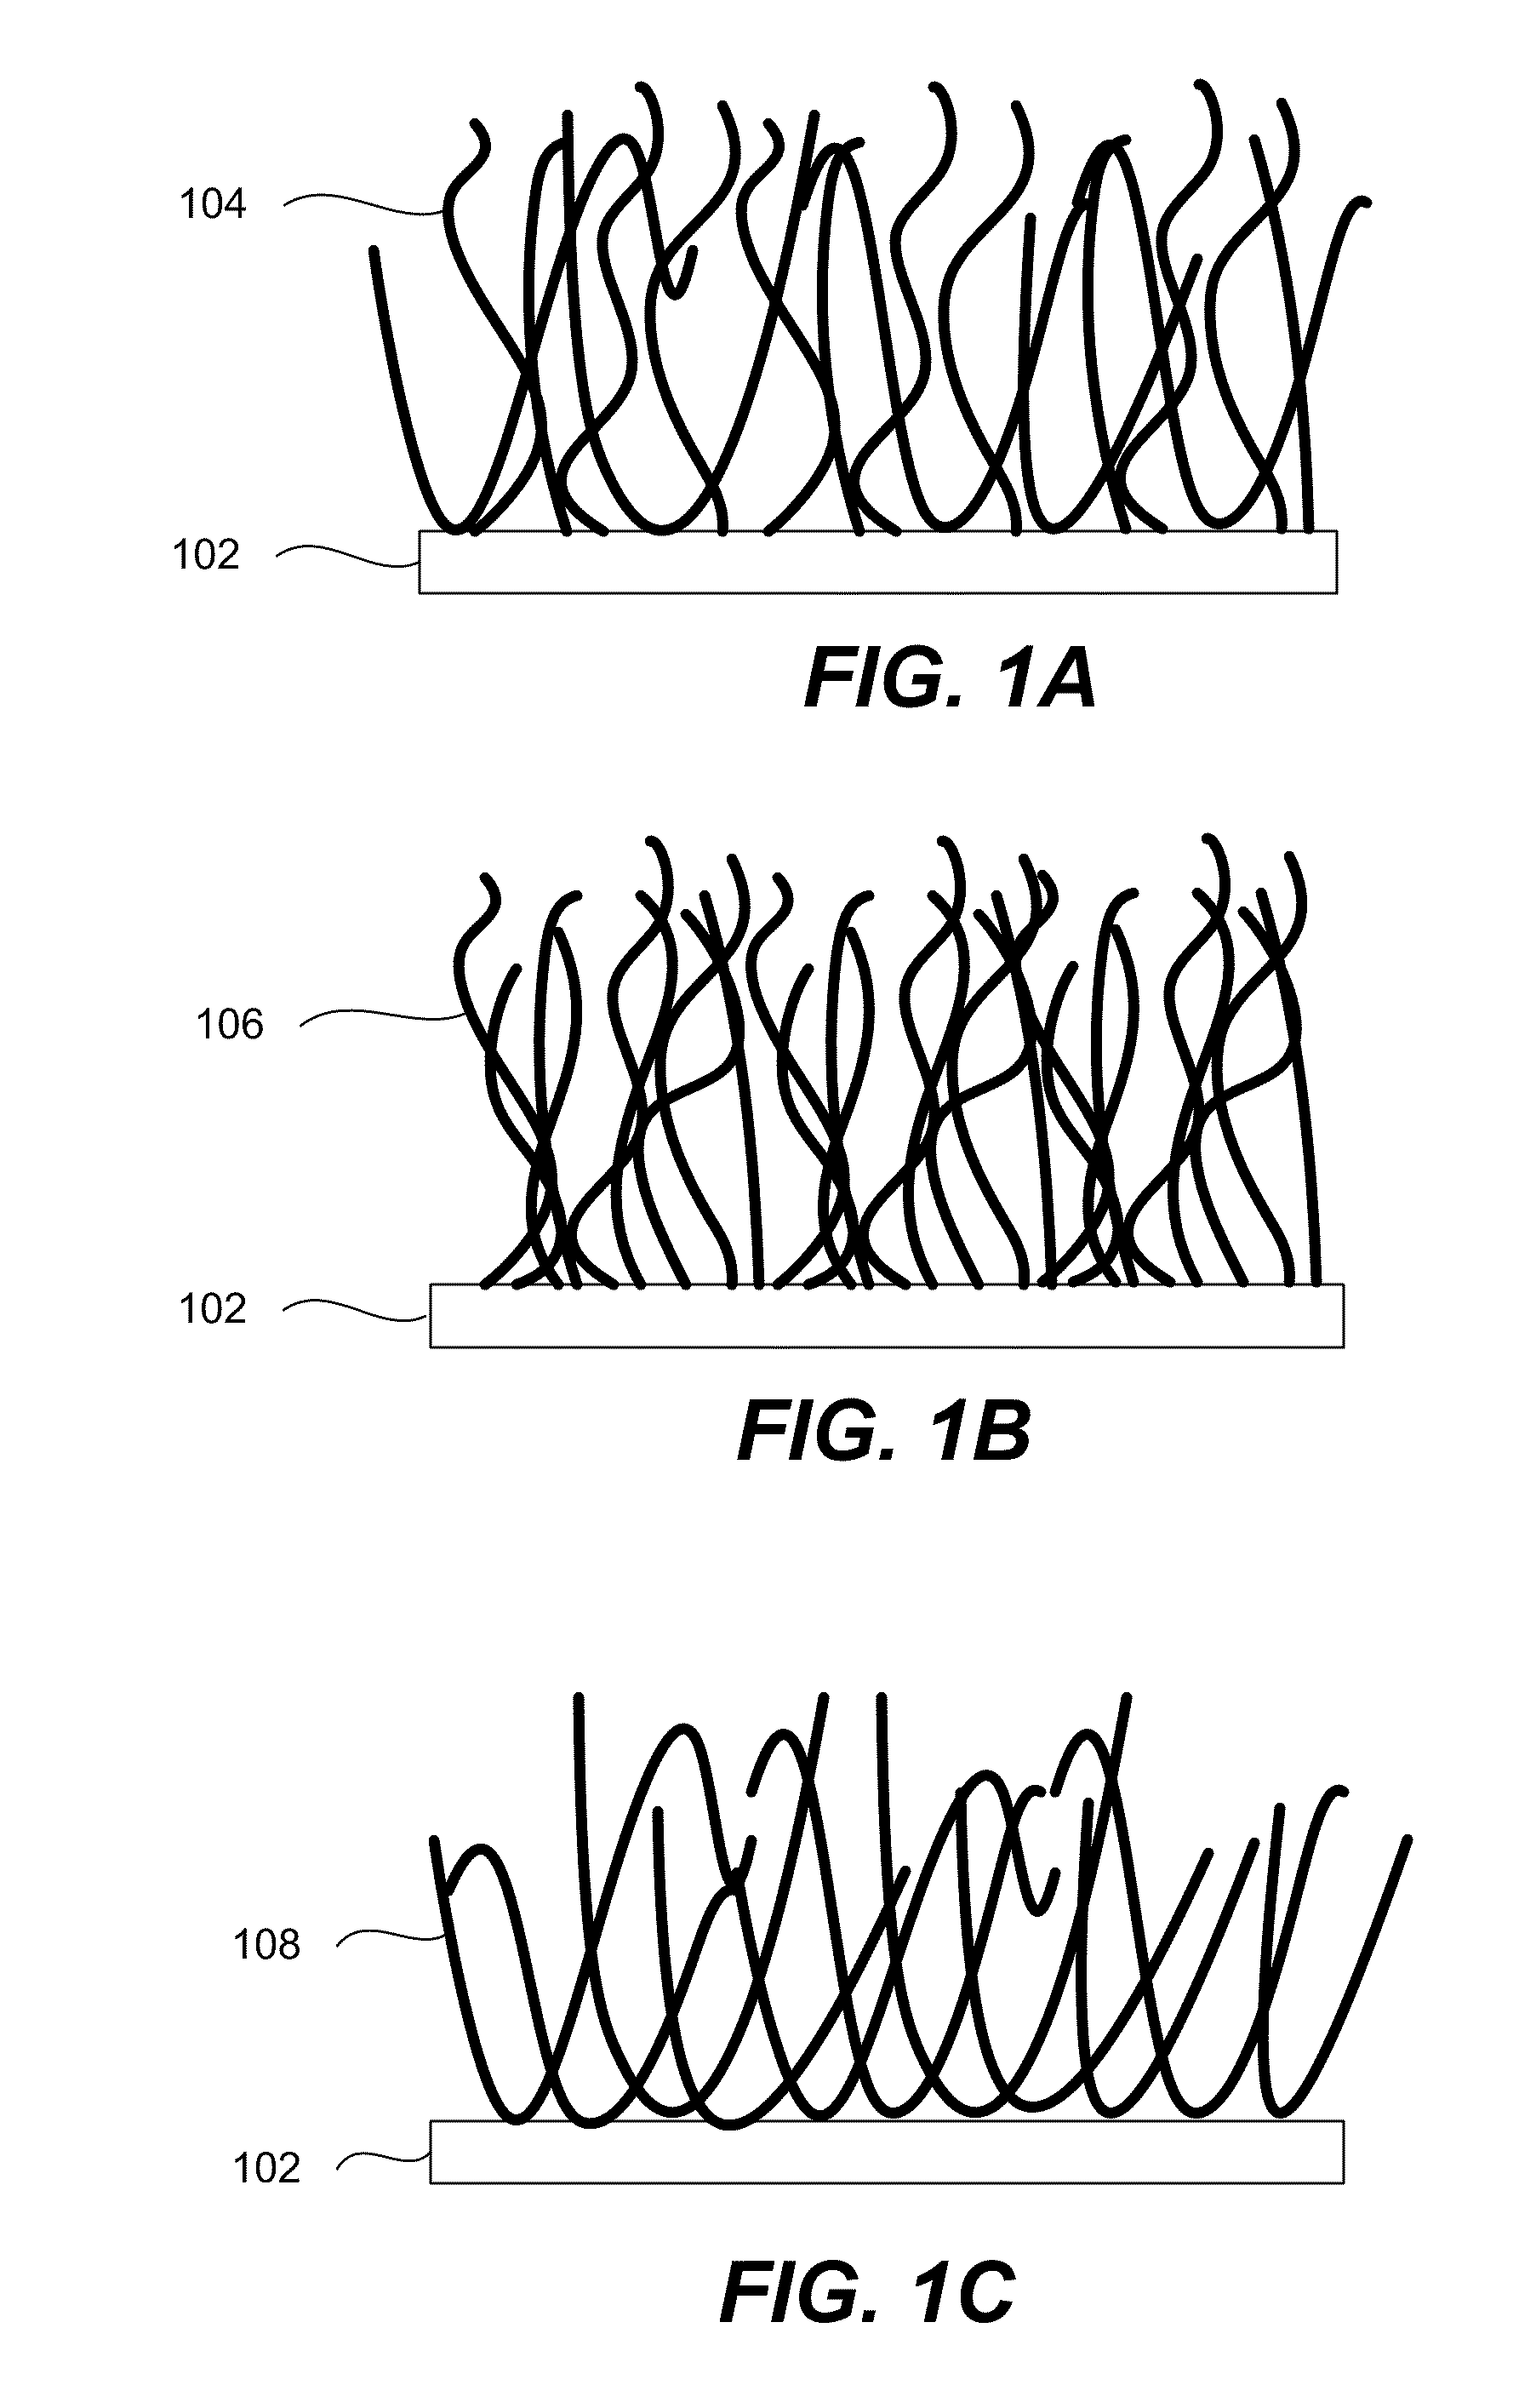 Electrode Including Nanostructures for Rechargeable Cells